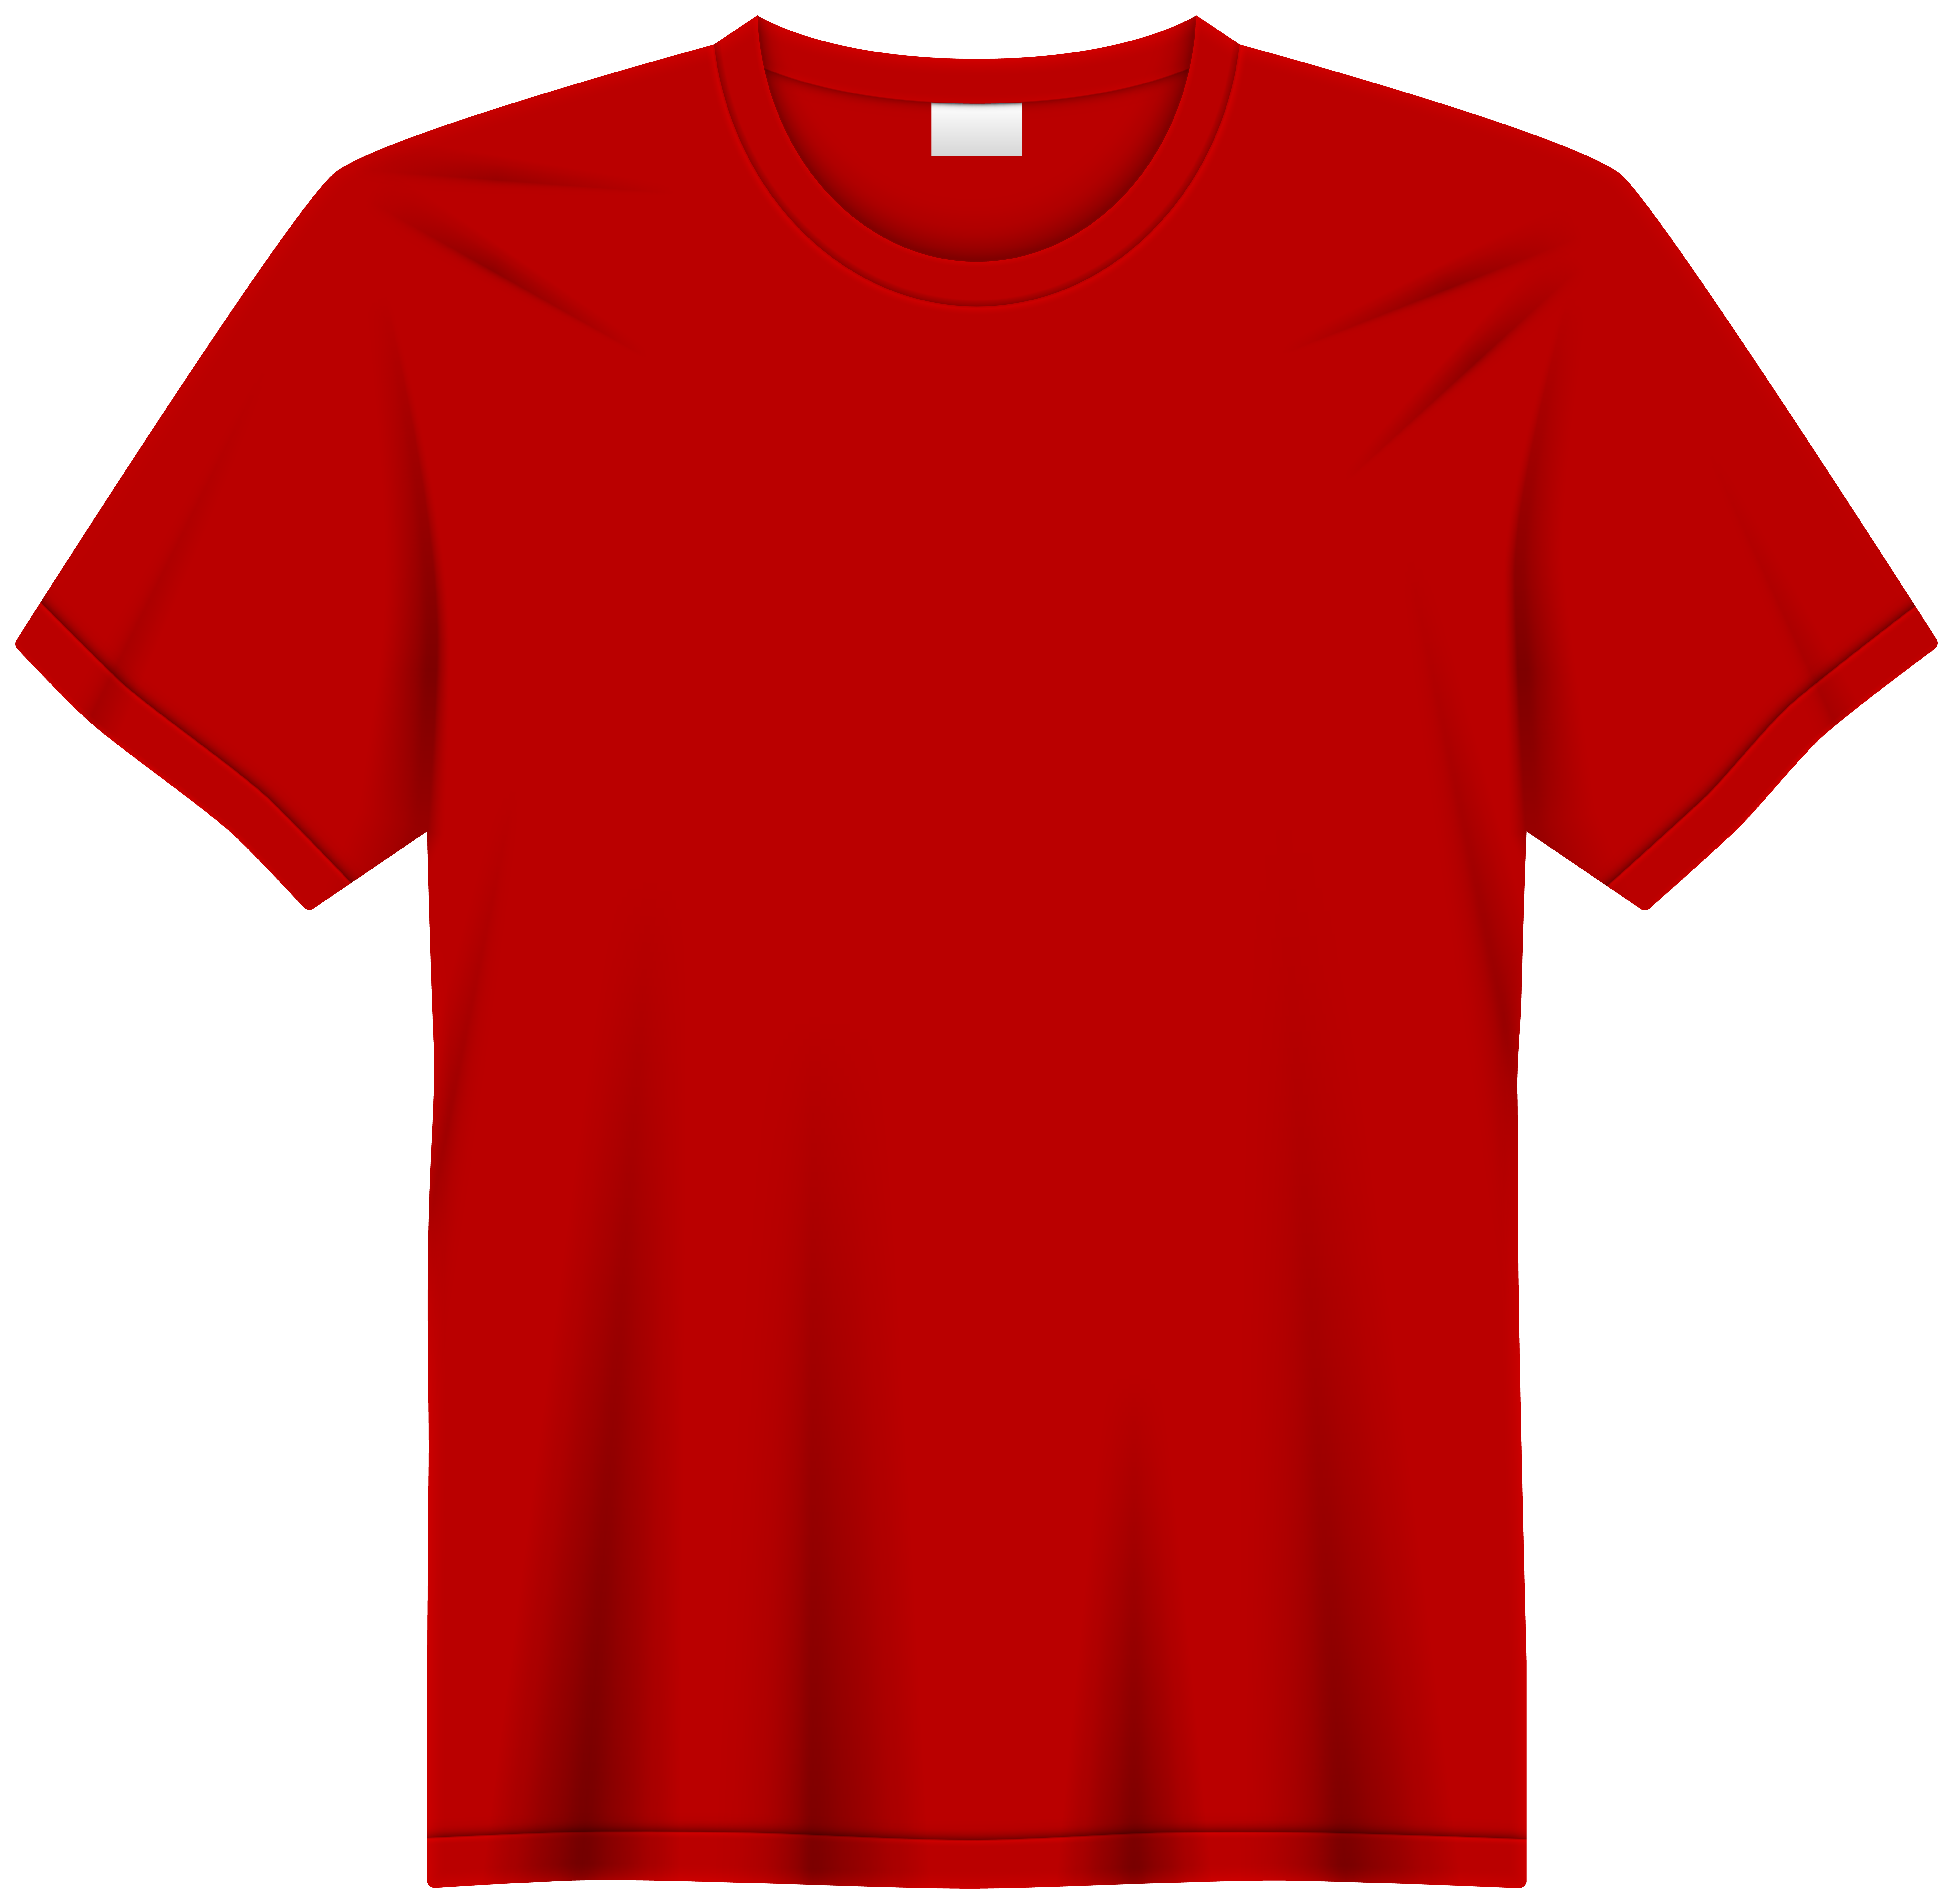 Tshirt Template Red